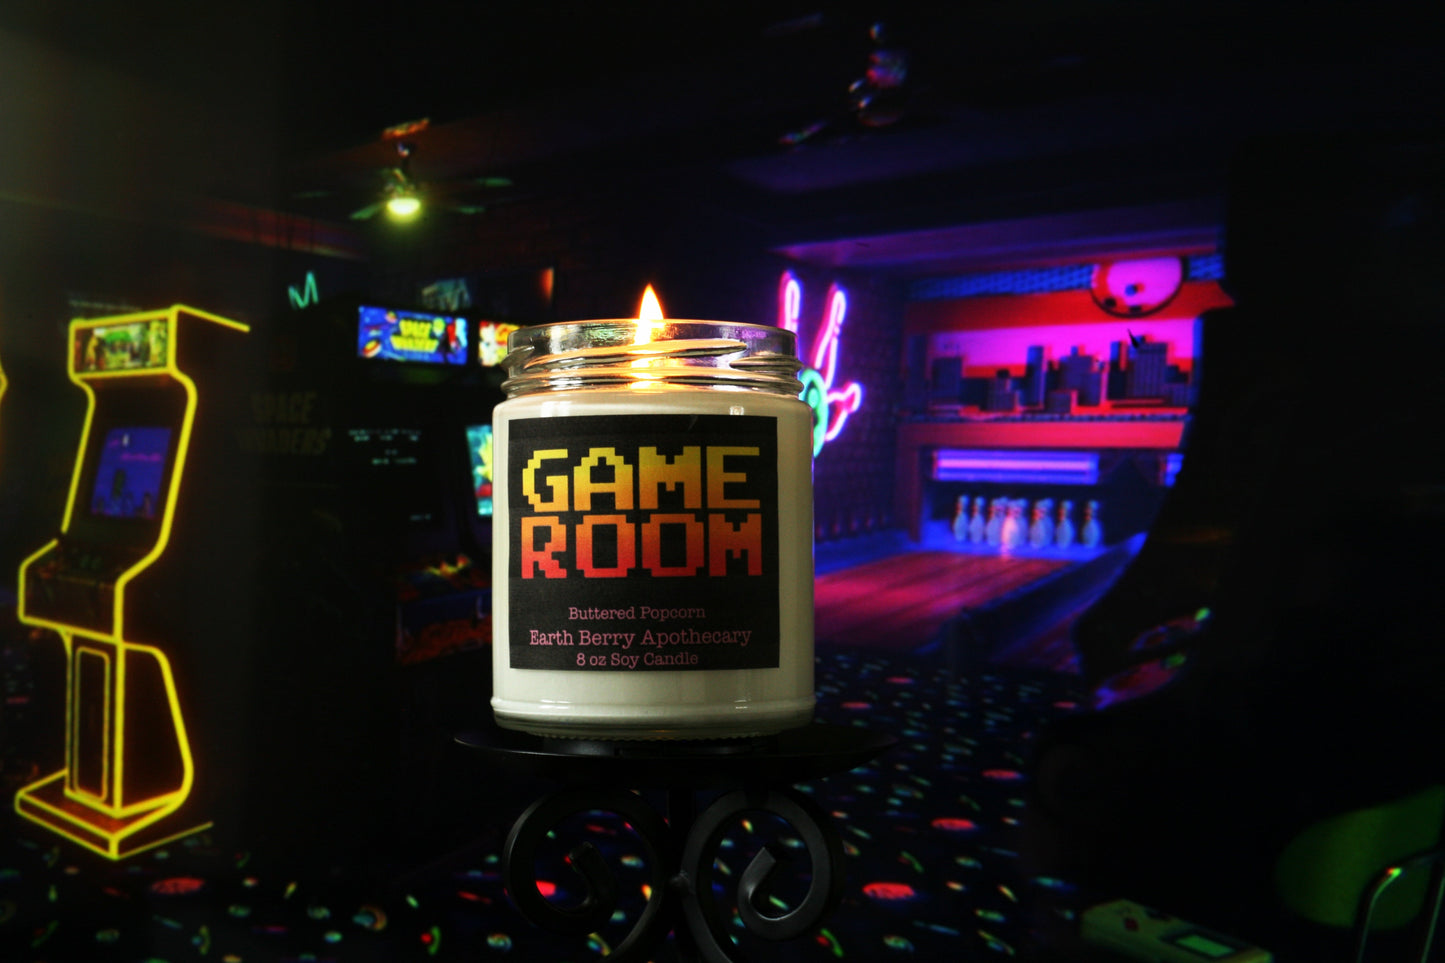 game room candle in front of arcade machines